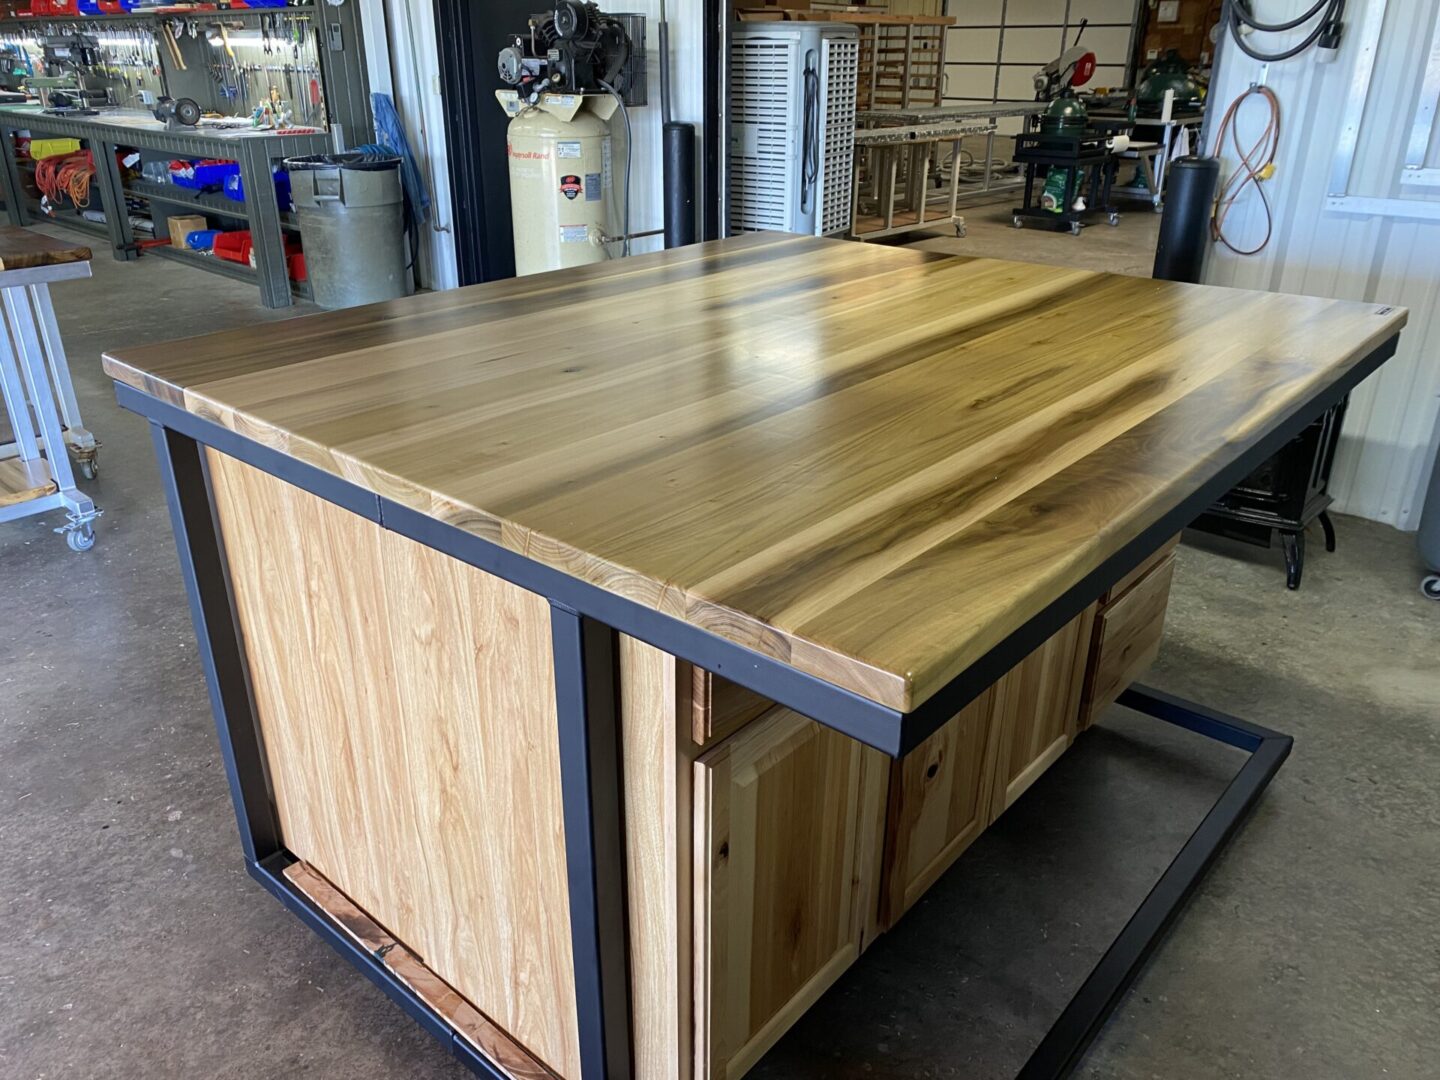 Completed table delivered for the Mitchell Project